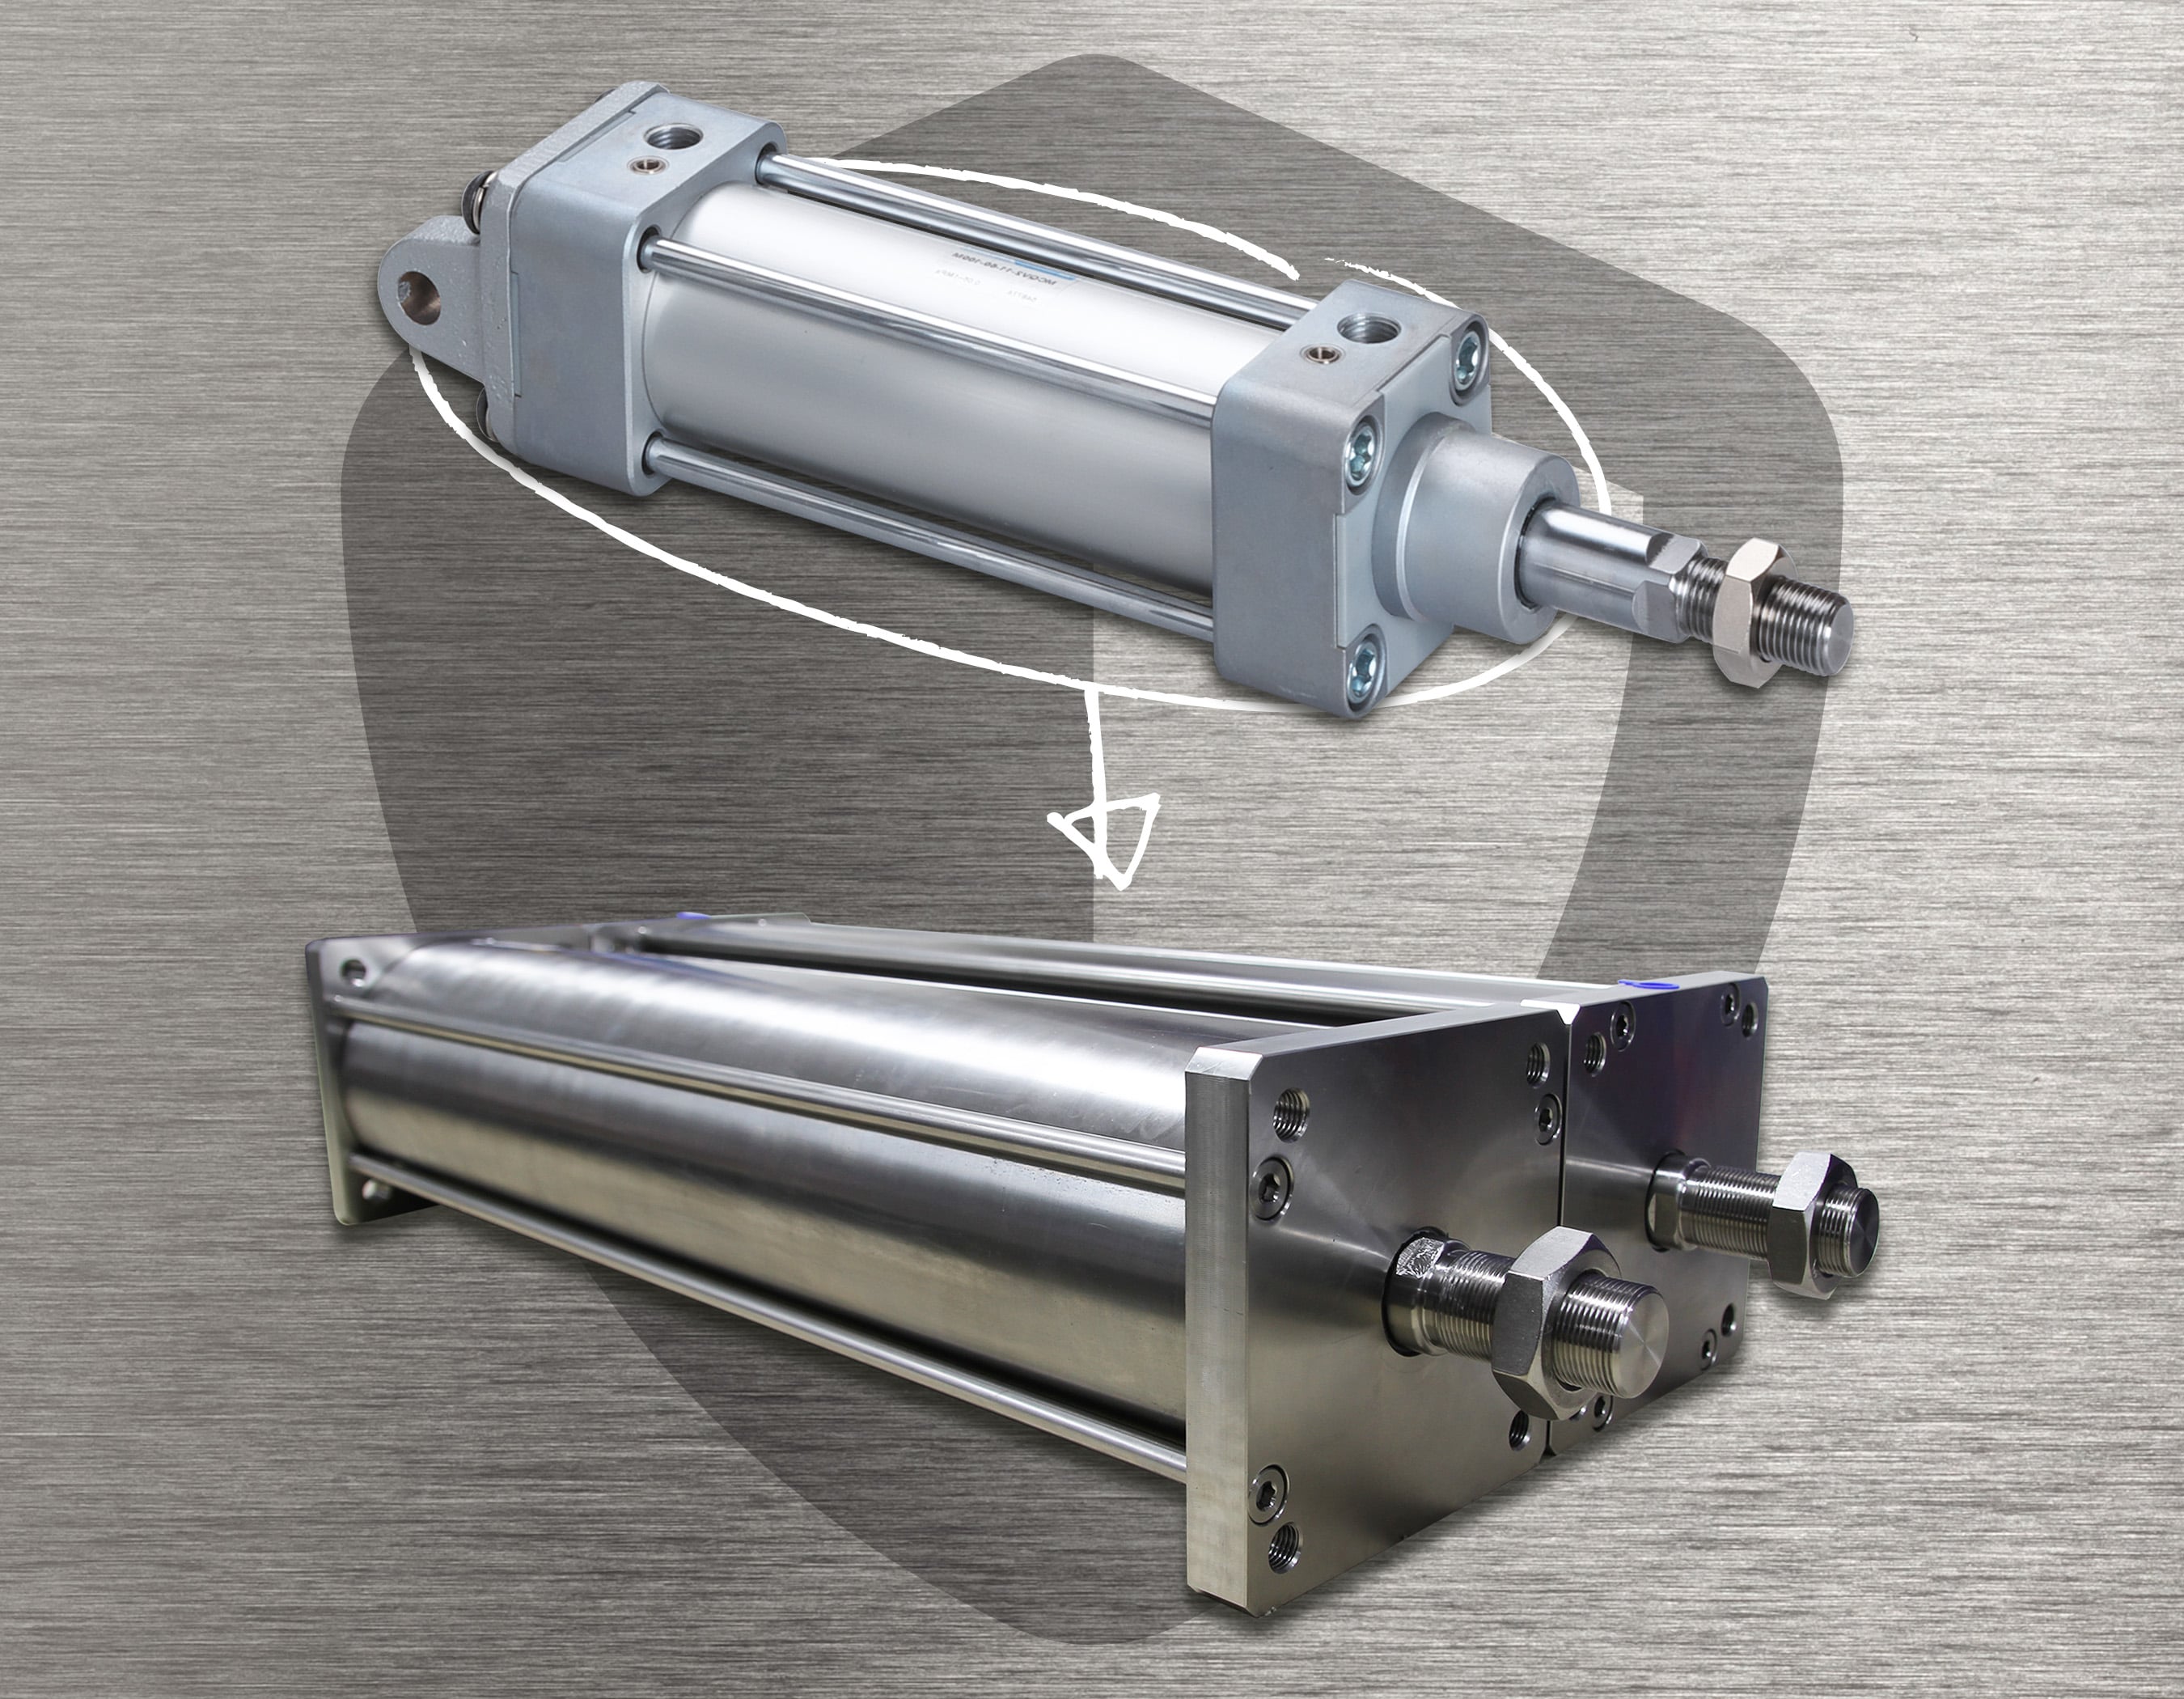 Pneumatic cylinders are an efficient, reliable and clean solution for moving loads in a linear direction (back and forth or up and down), with good levels of force and speed.